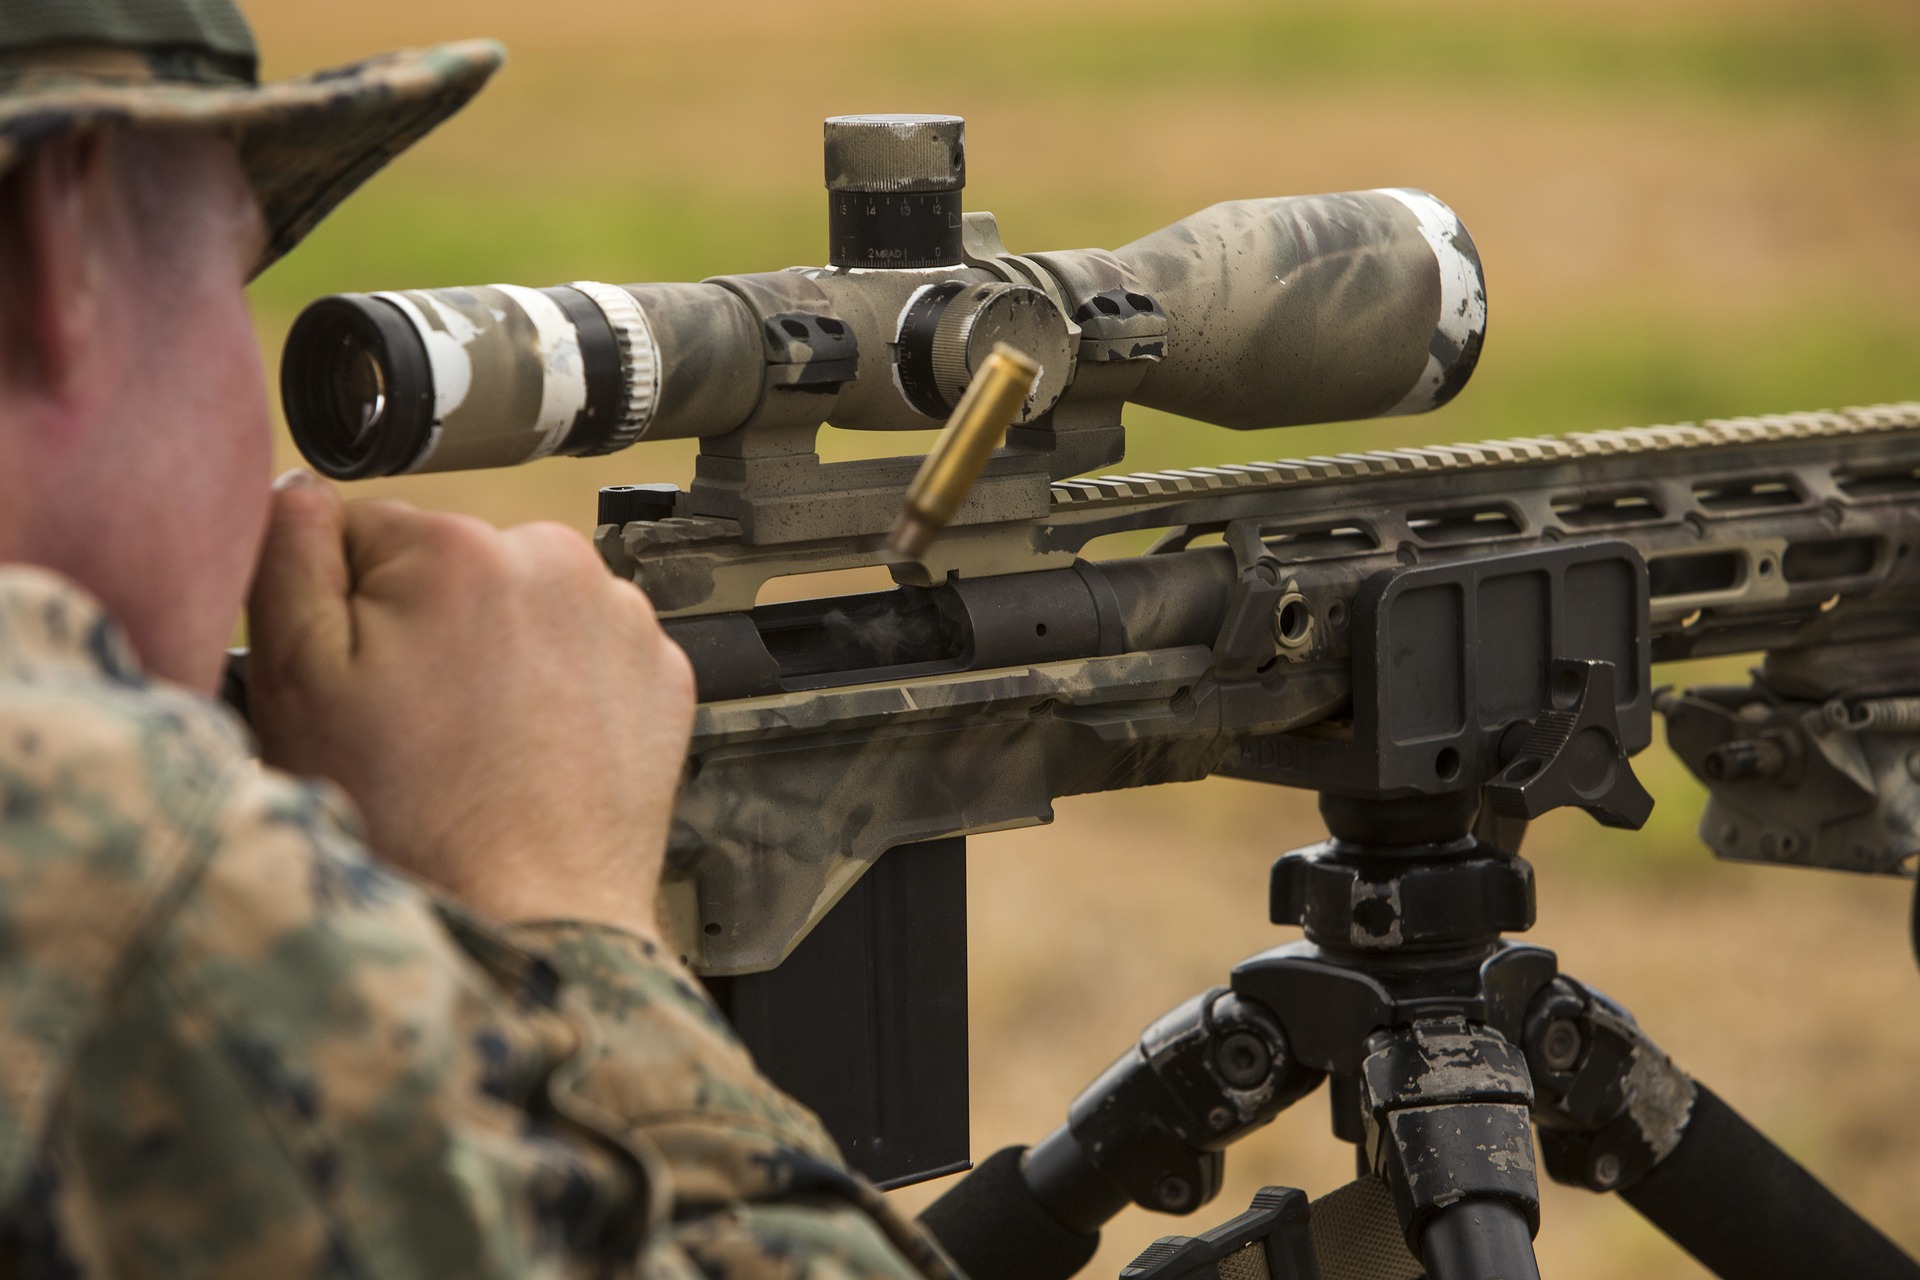 How to Mount a Leupold Scope